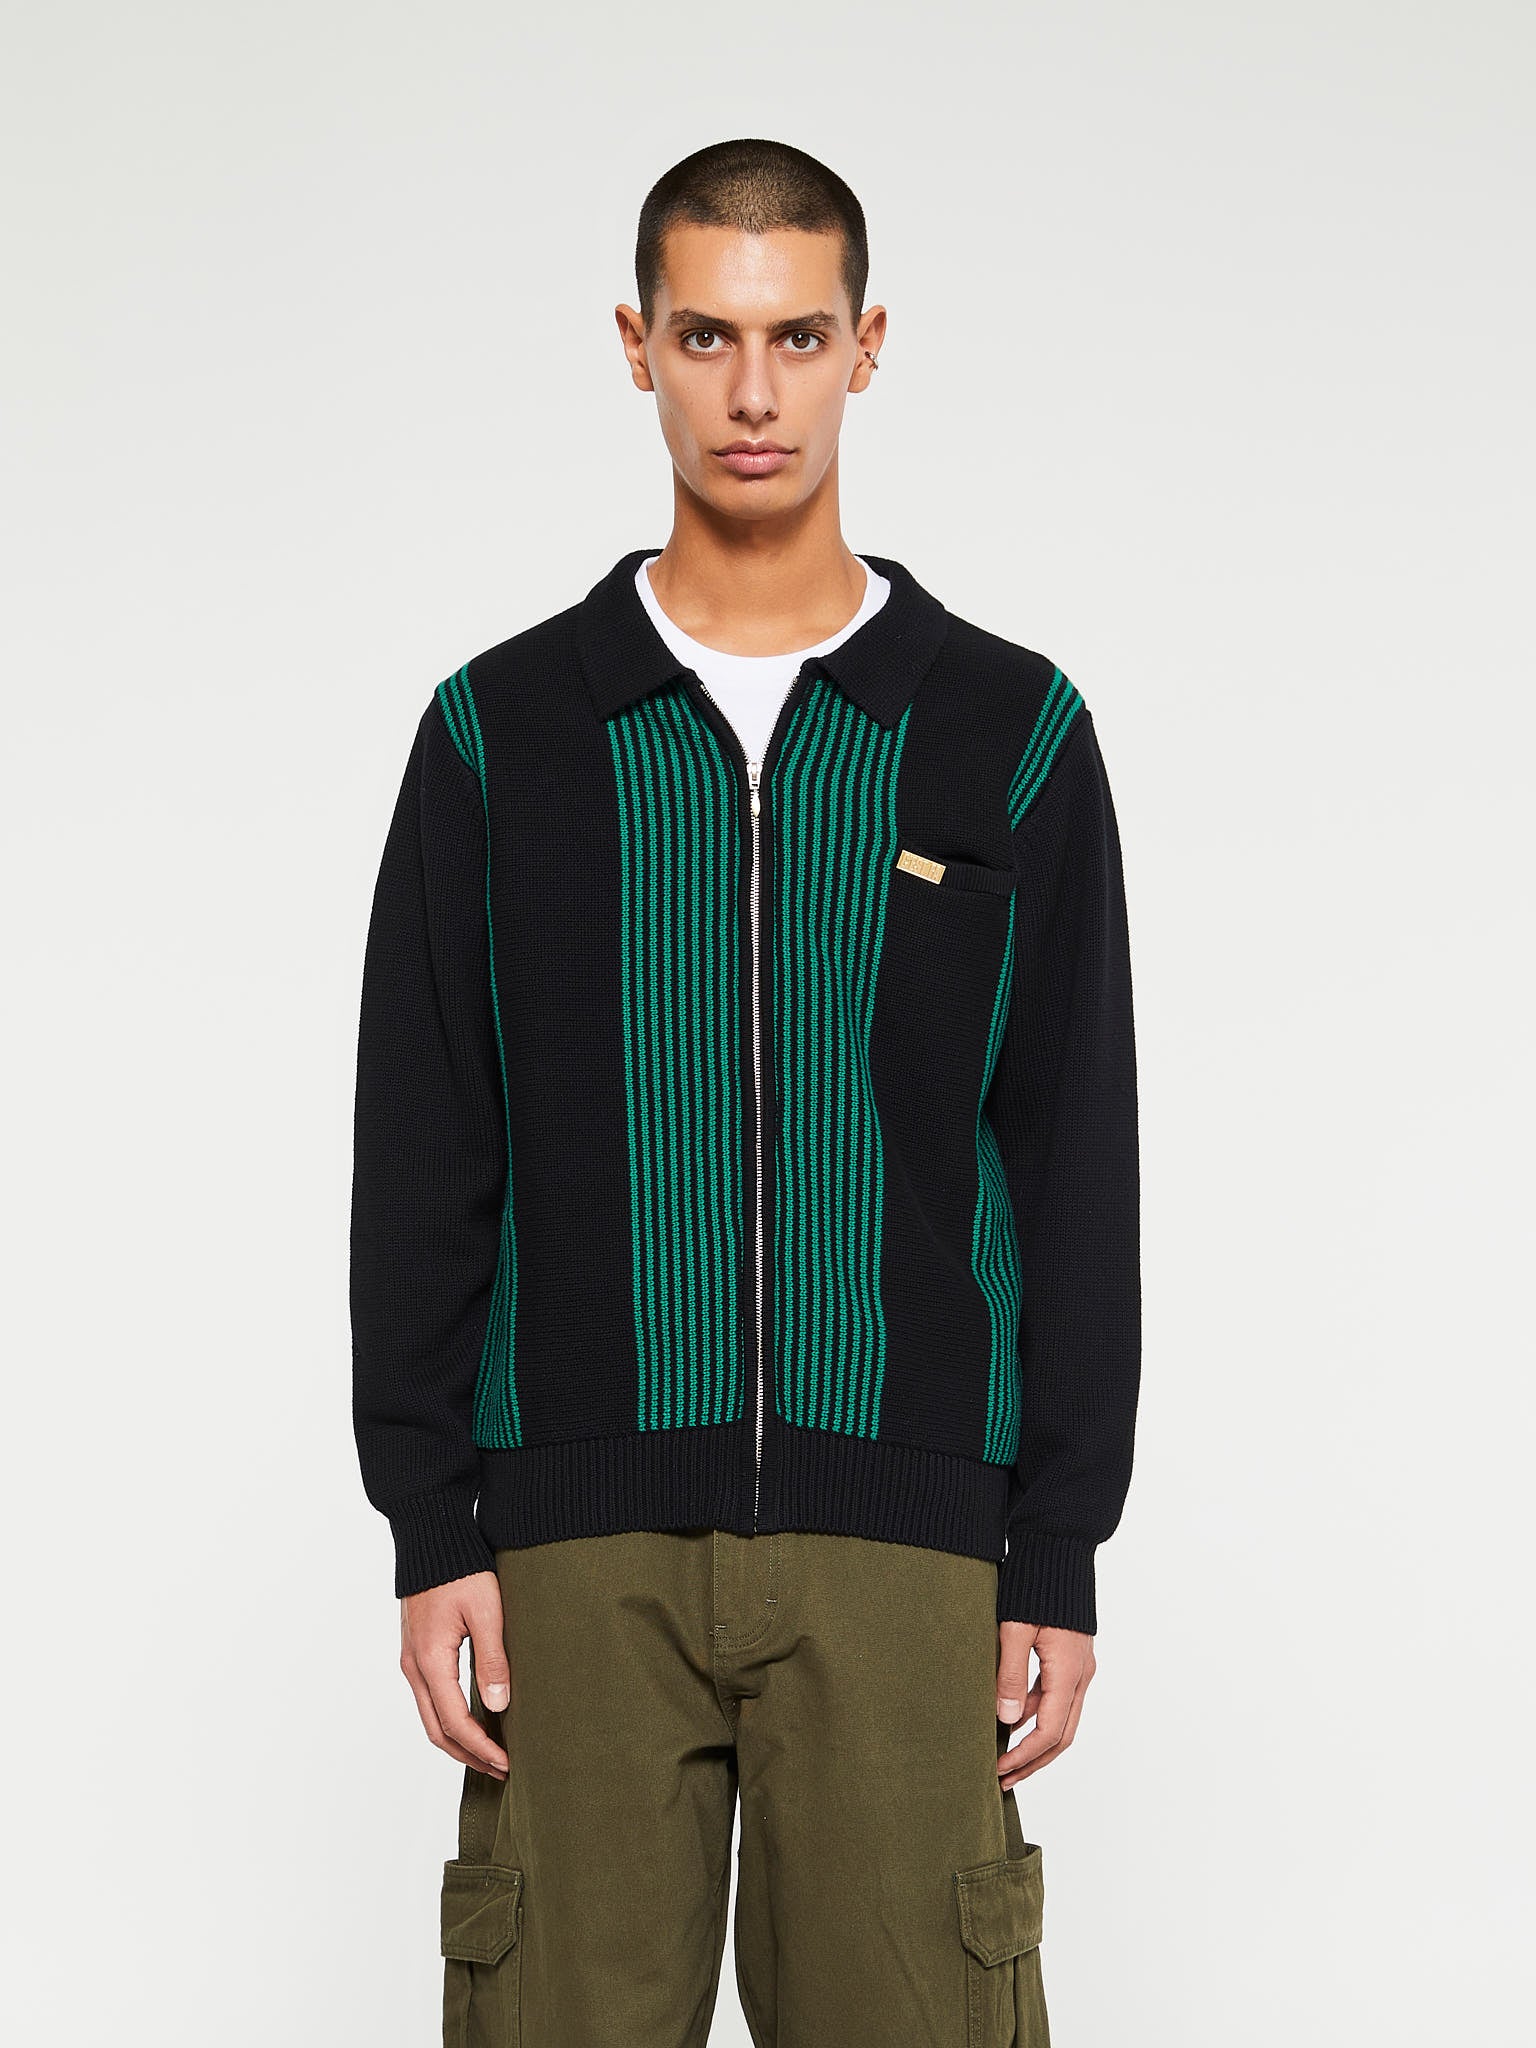 Fucking Awesome - Zip Polo Sweater in Black and Green